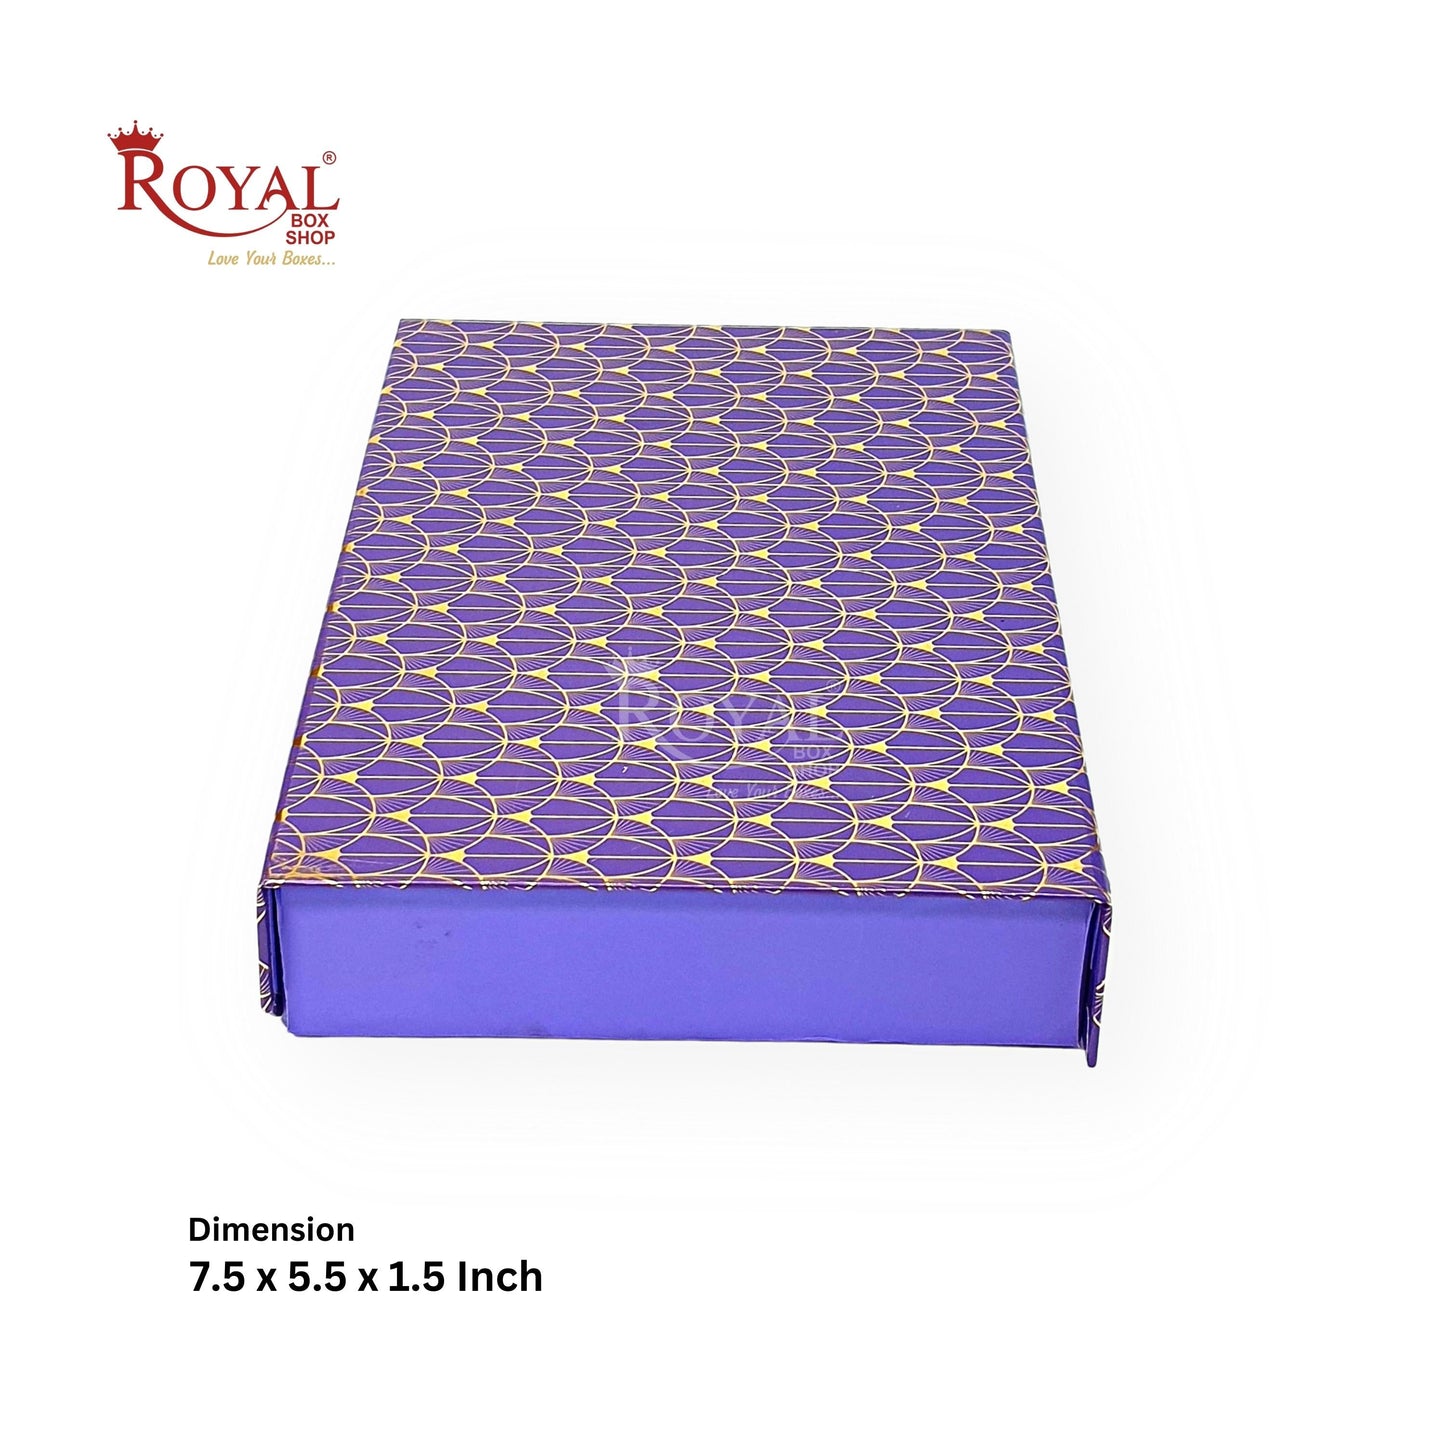 Rigid Chocolate Boxes 12 Cavity With Magnetic Flap I Purple with Gold Foiling I 7.5 X 5.5 X 1.5 Inch I Kappa Boxes Royal Box Shop